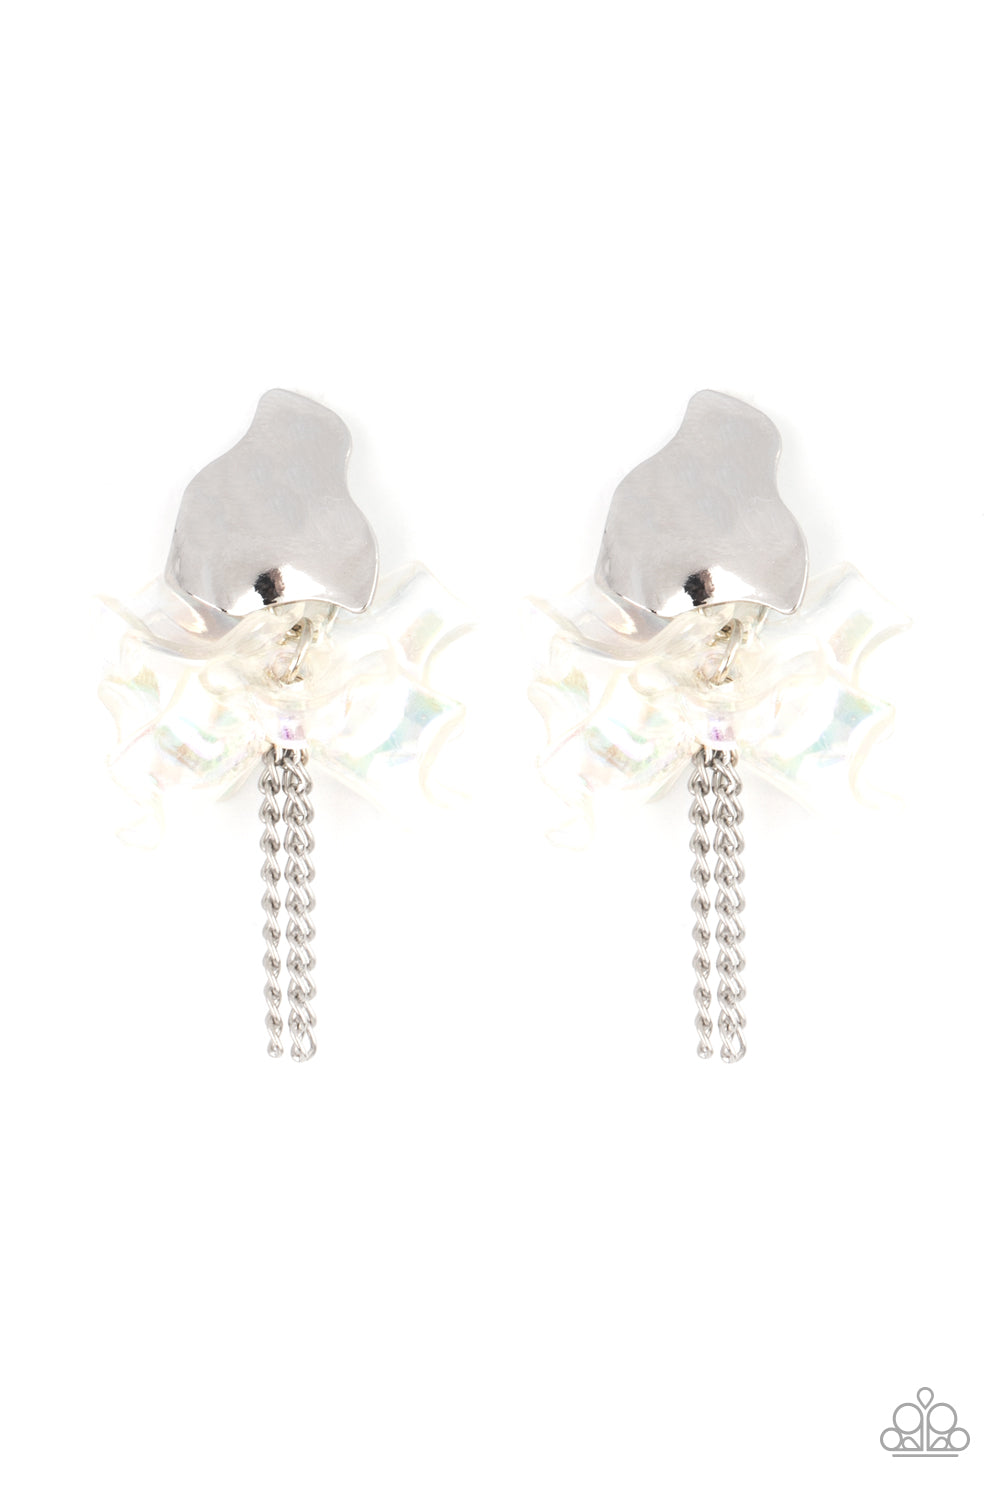 Harmonically Holographic - White & Silver Earrings - Princess Glam Shop